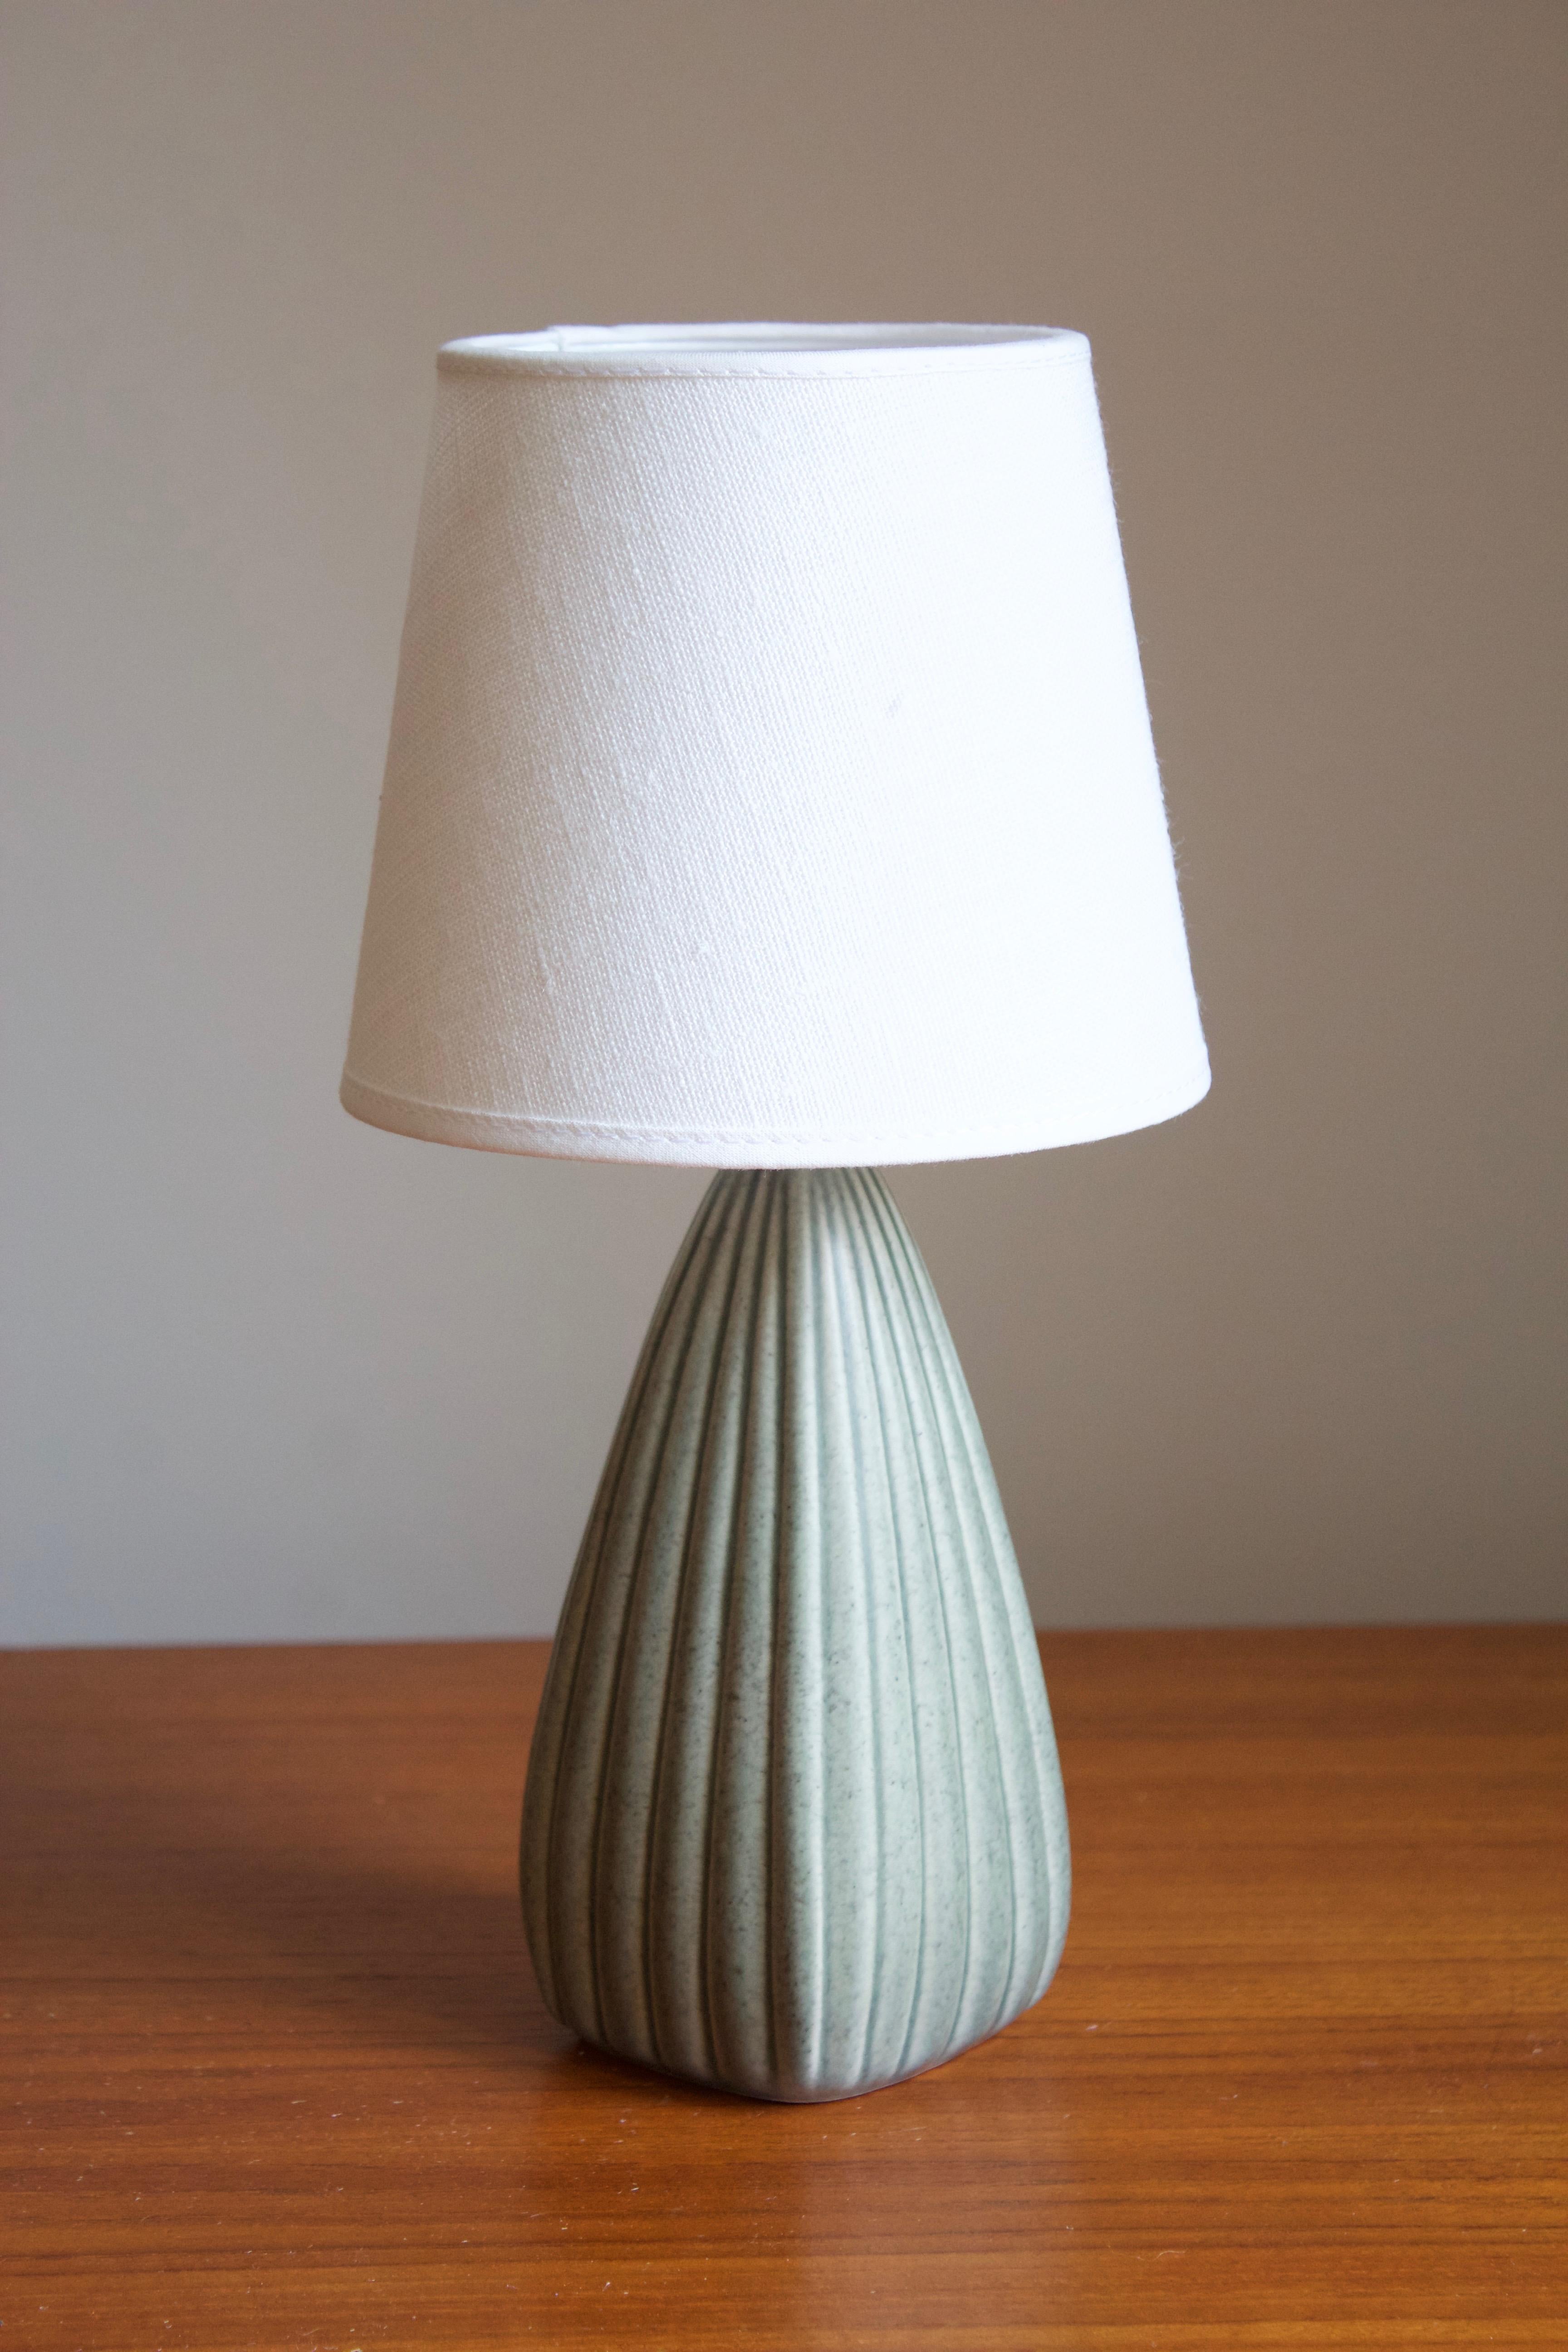 A small table lamp. Signed. Designed and produced in Denmark, 1960s-1970s. Unidentified designer and maker. Brand new high-end linen lampshade. Features simple ribbed ornamentation typical to Danish ceramics. Sold without lampshade.

Other designers